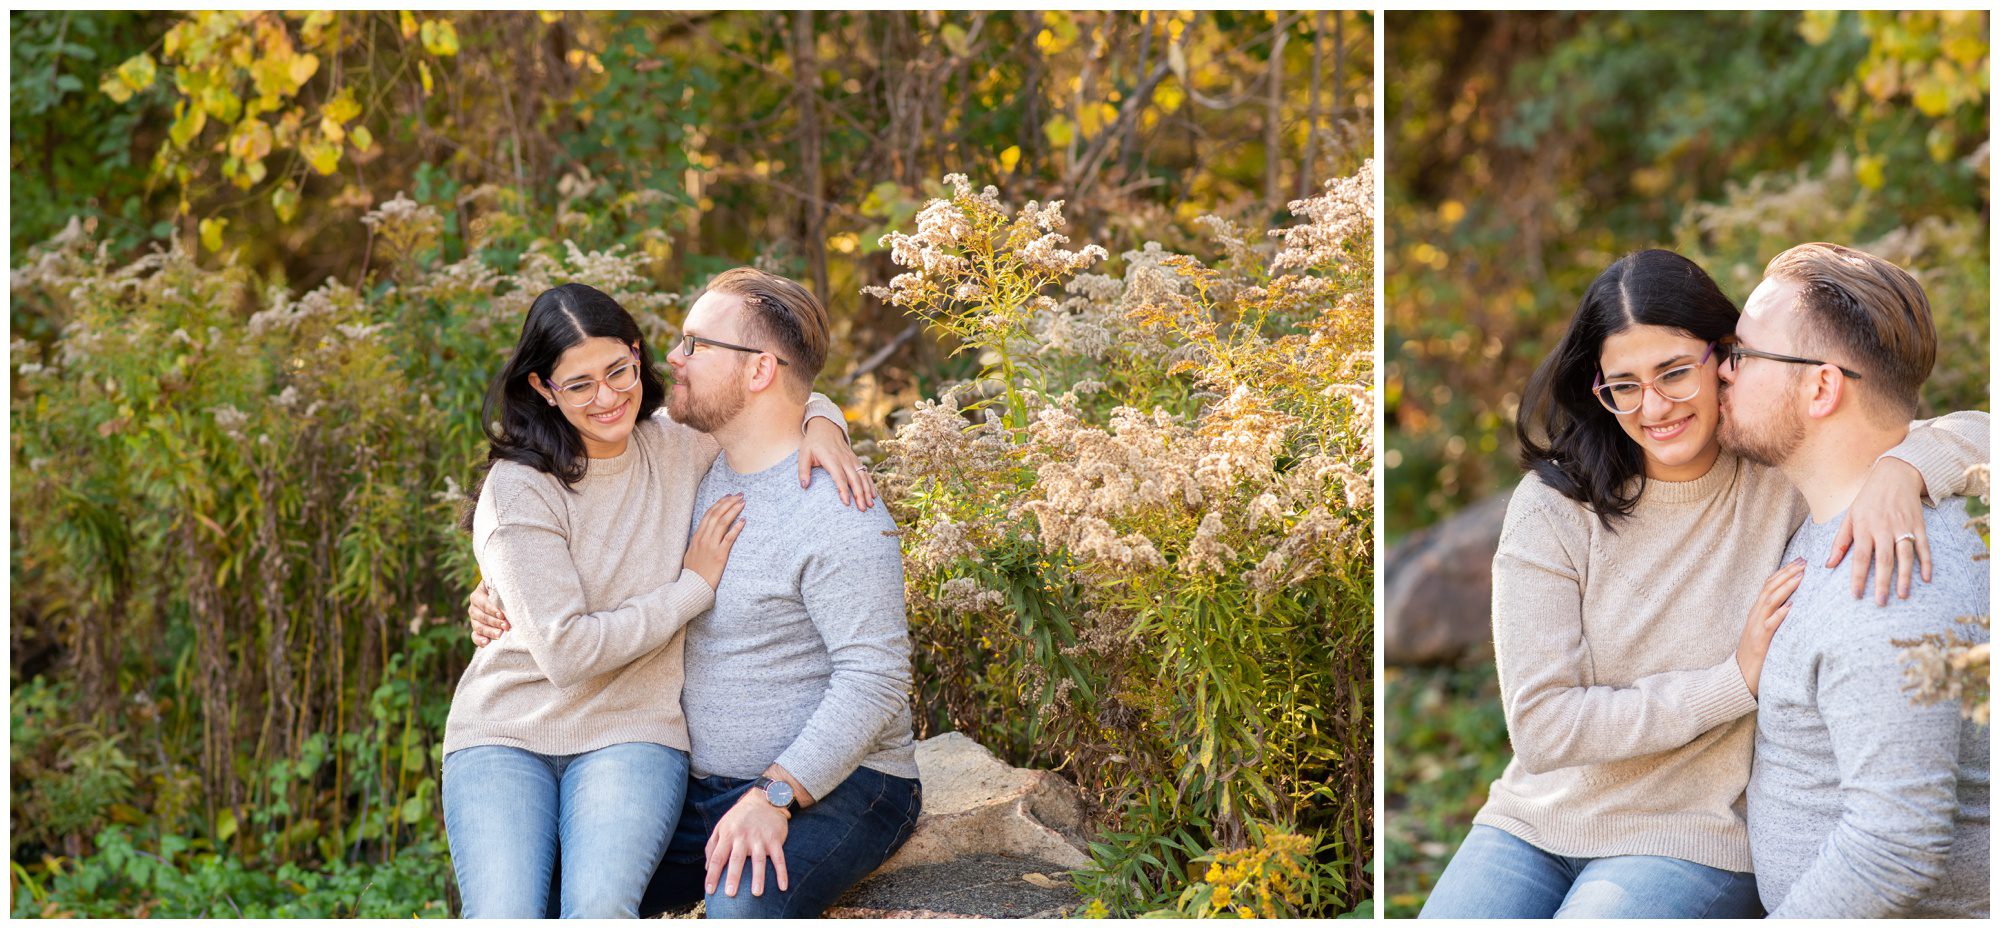 Fanshawe Conservation Area, London Ontario Engagement Photography, Michelle A Photography